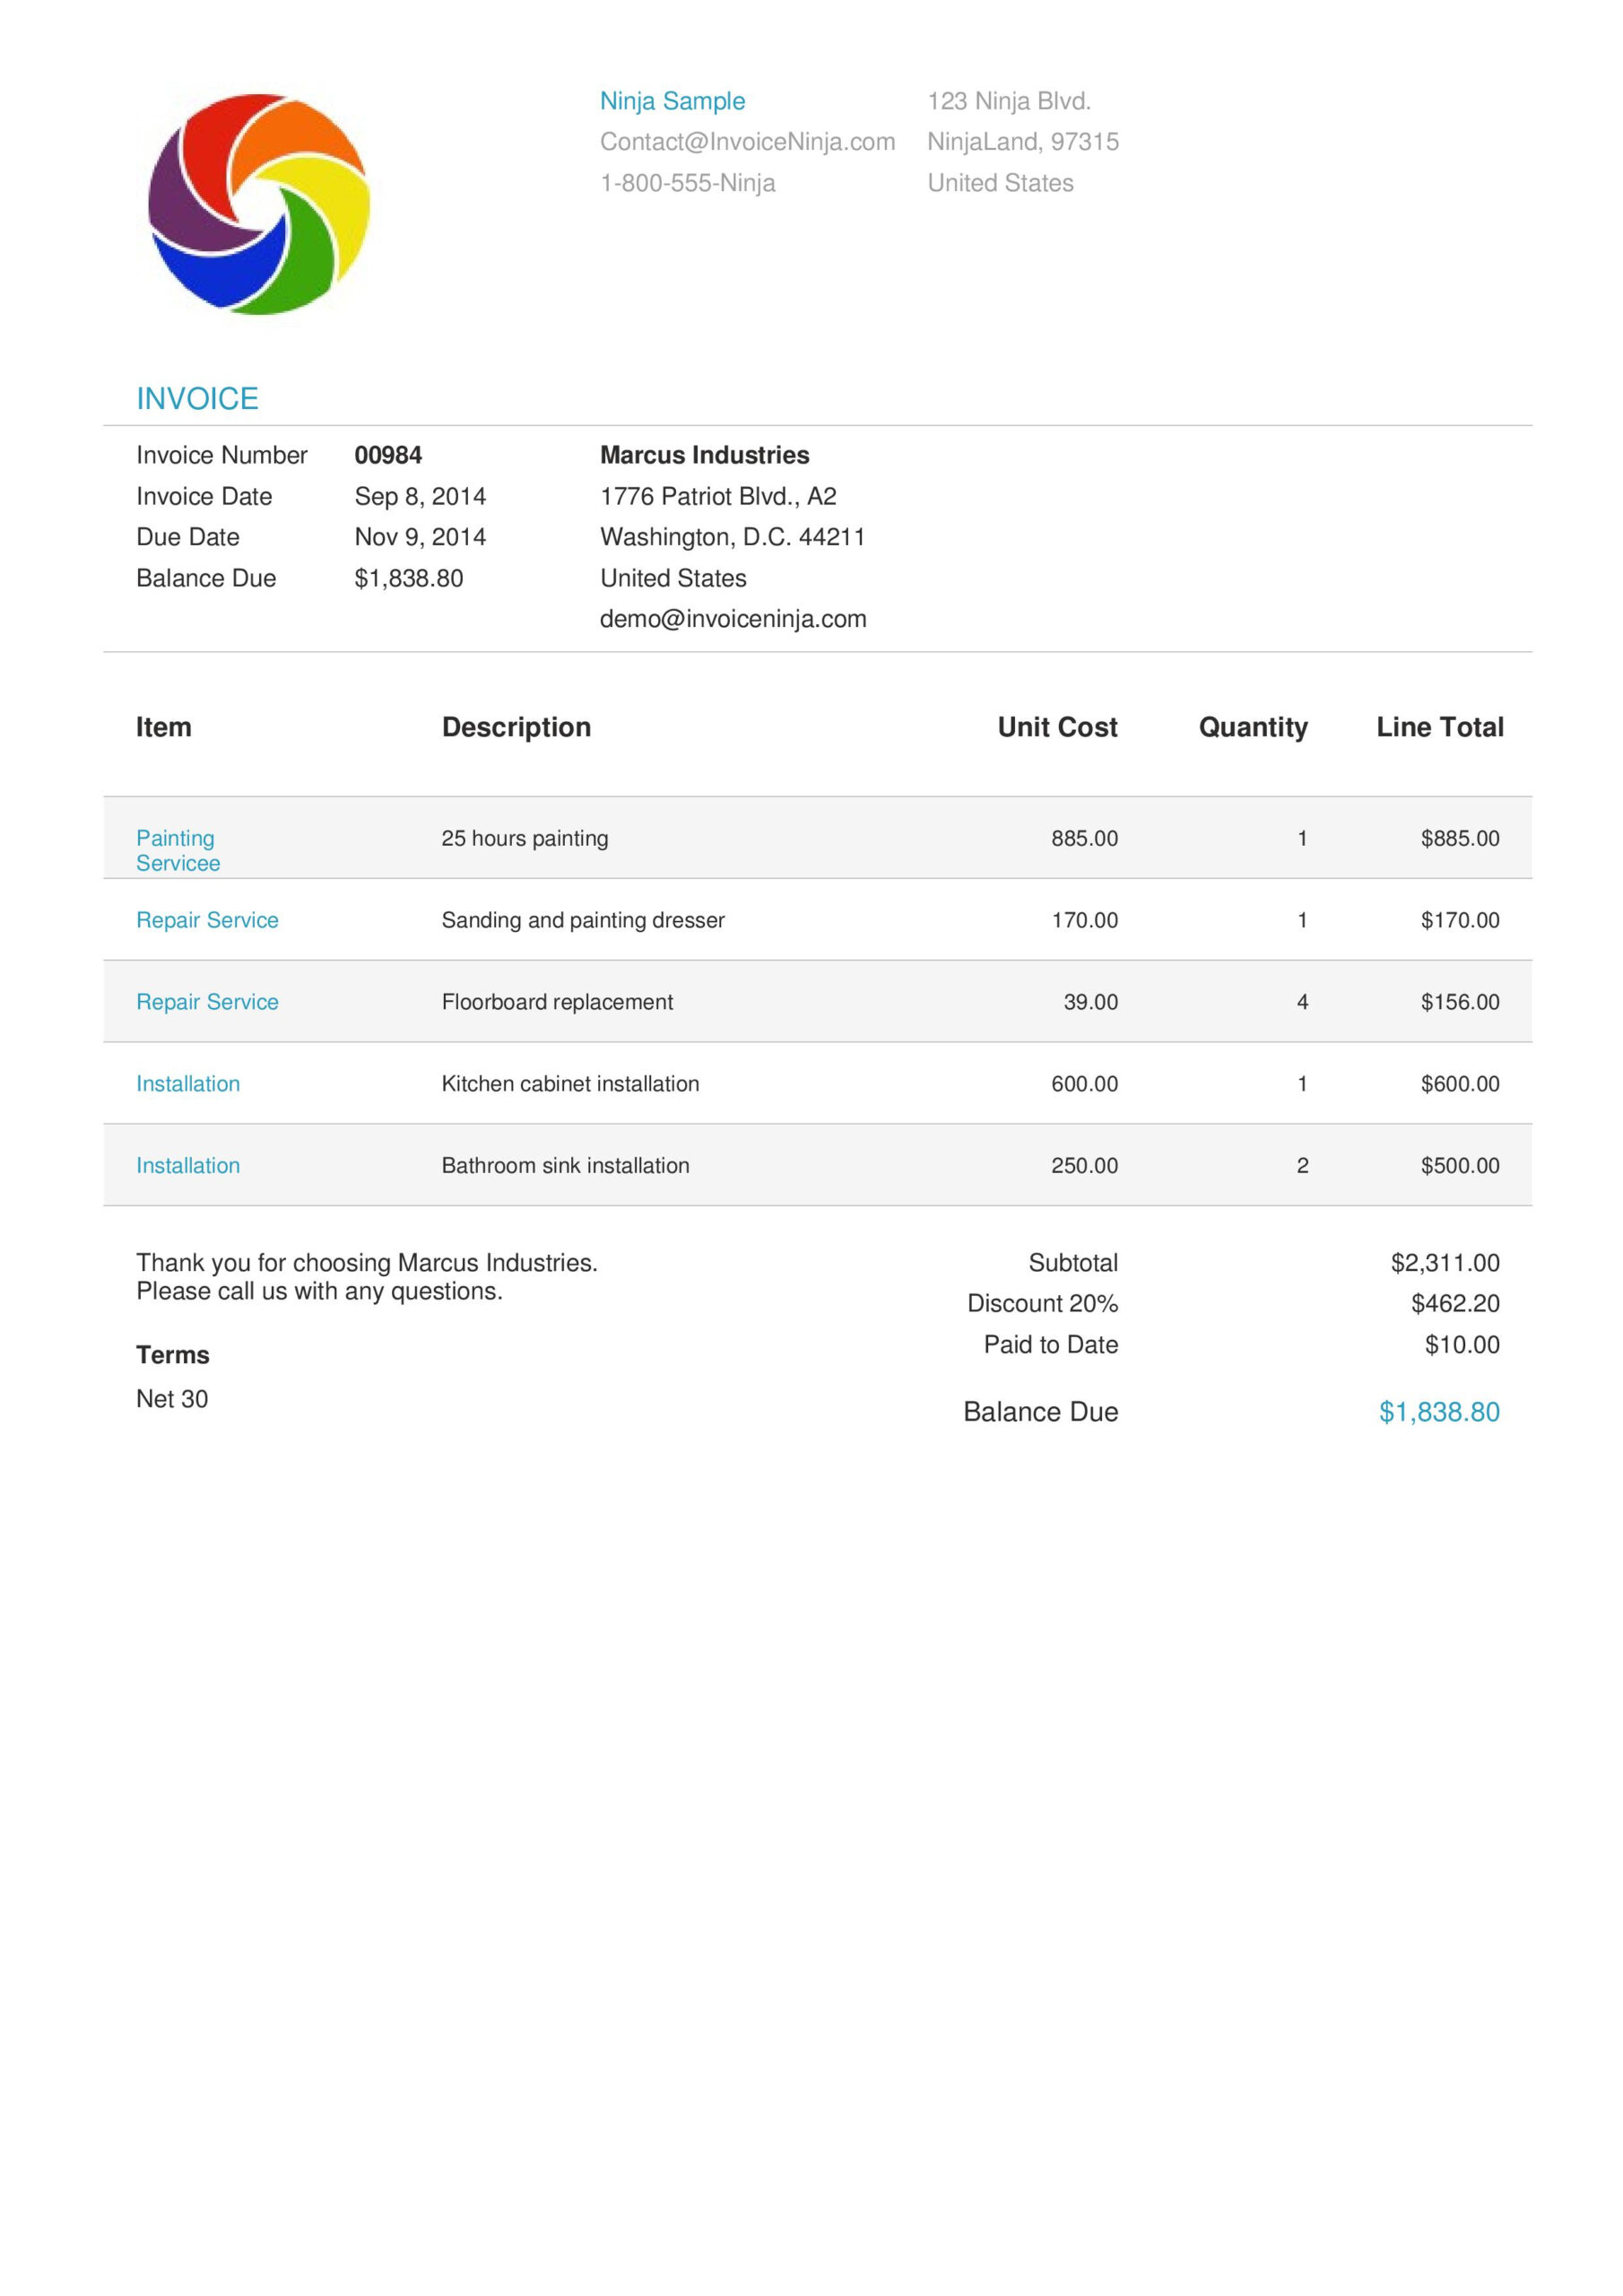 Invoice & Quotation Template Designs | Invoice Ninja Throughout Invoice Template Android